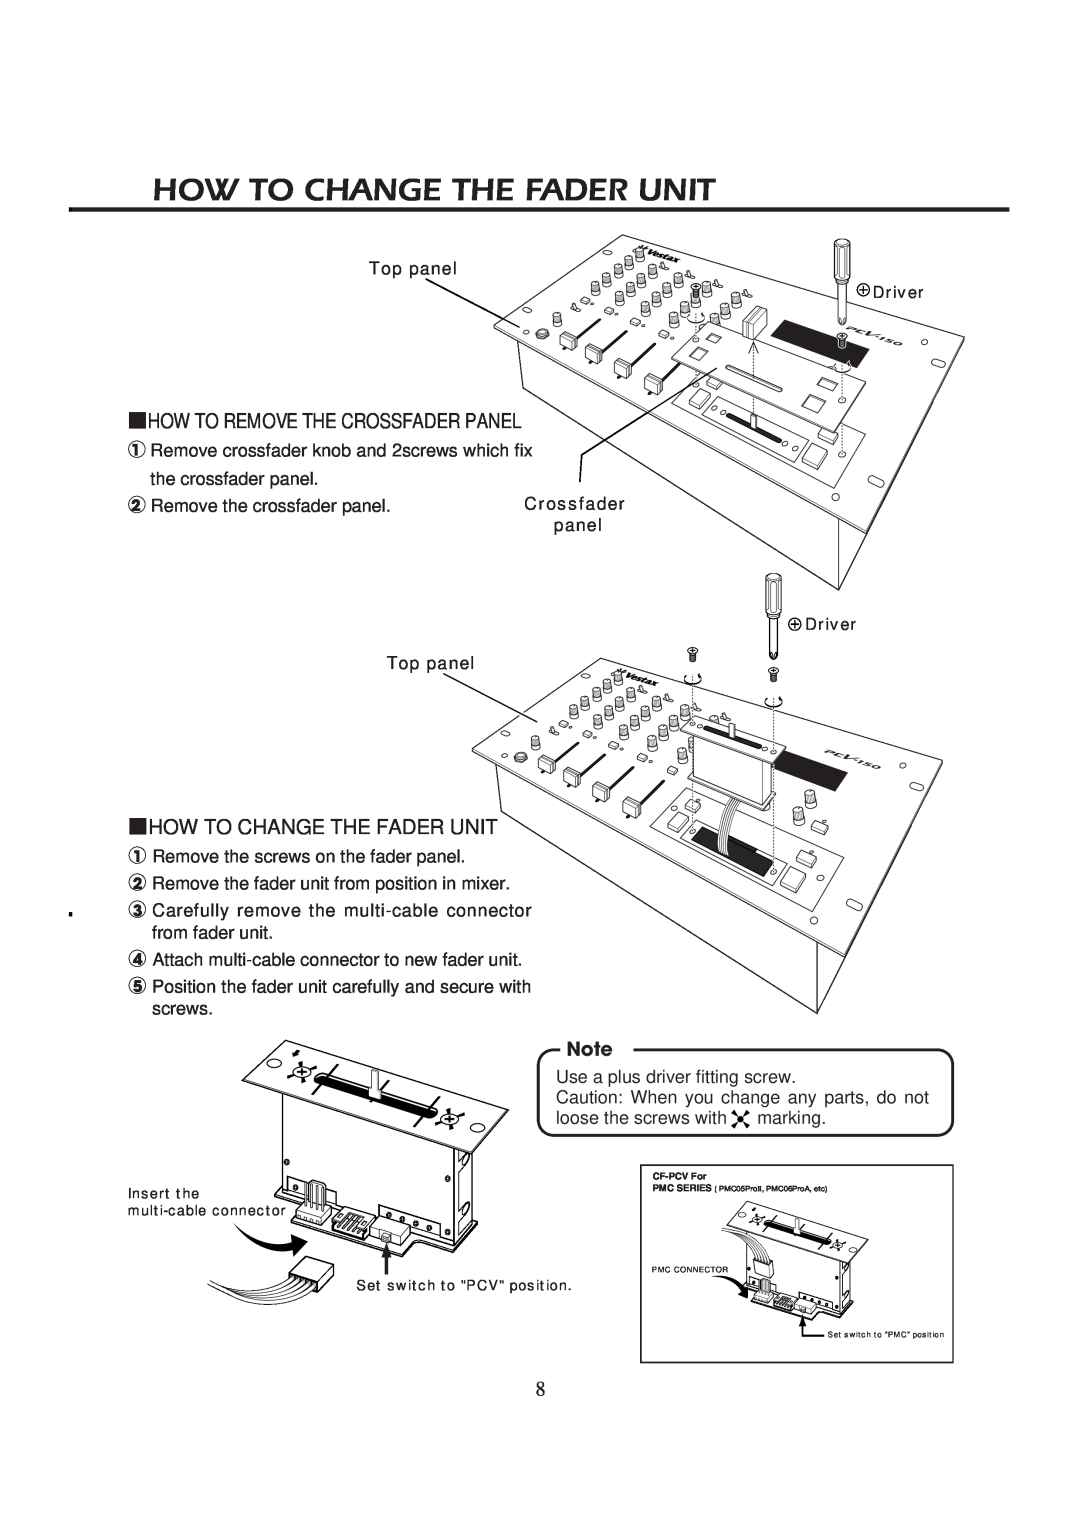 Vestax PCV-150 owner manual How To Change The Fader Unit, How To Remove The Crossfader Panel 